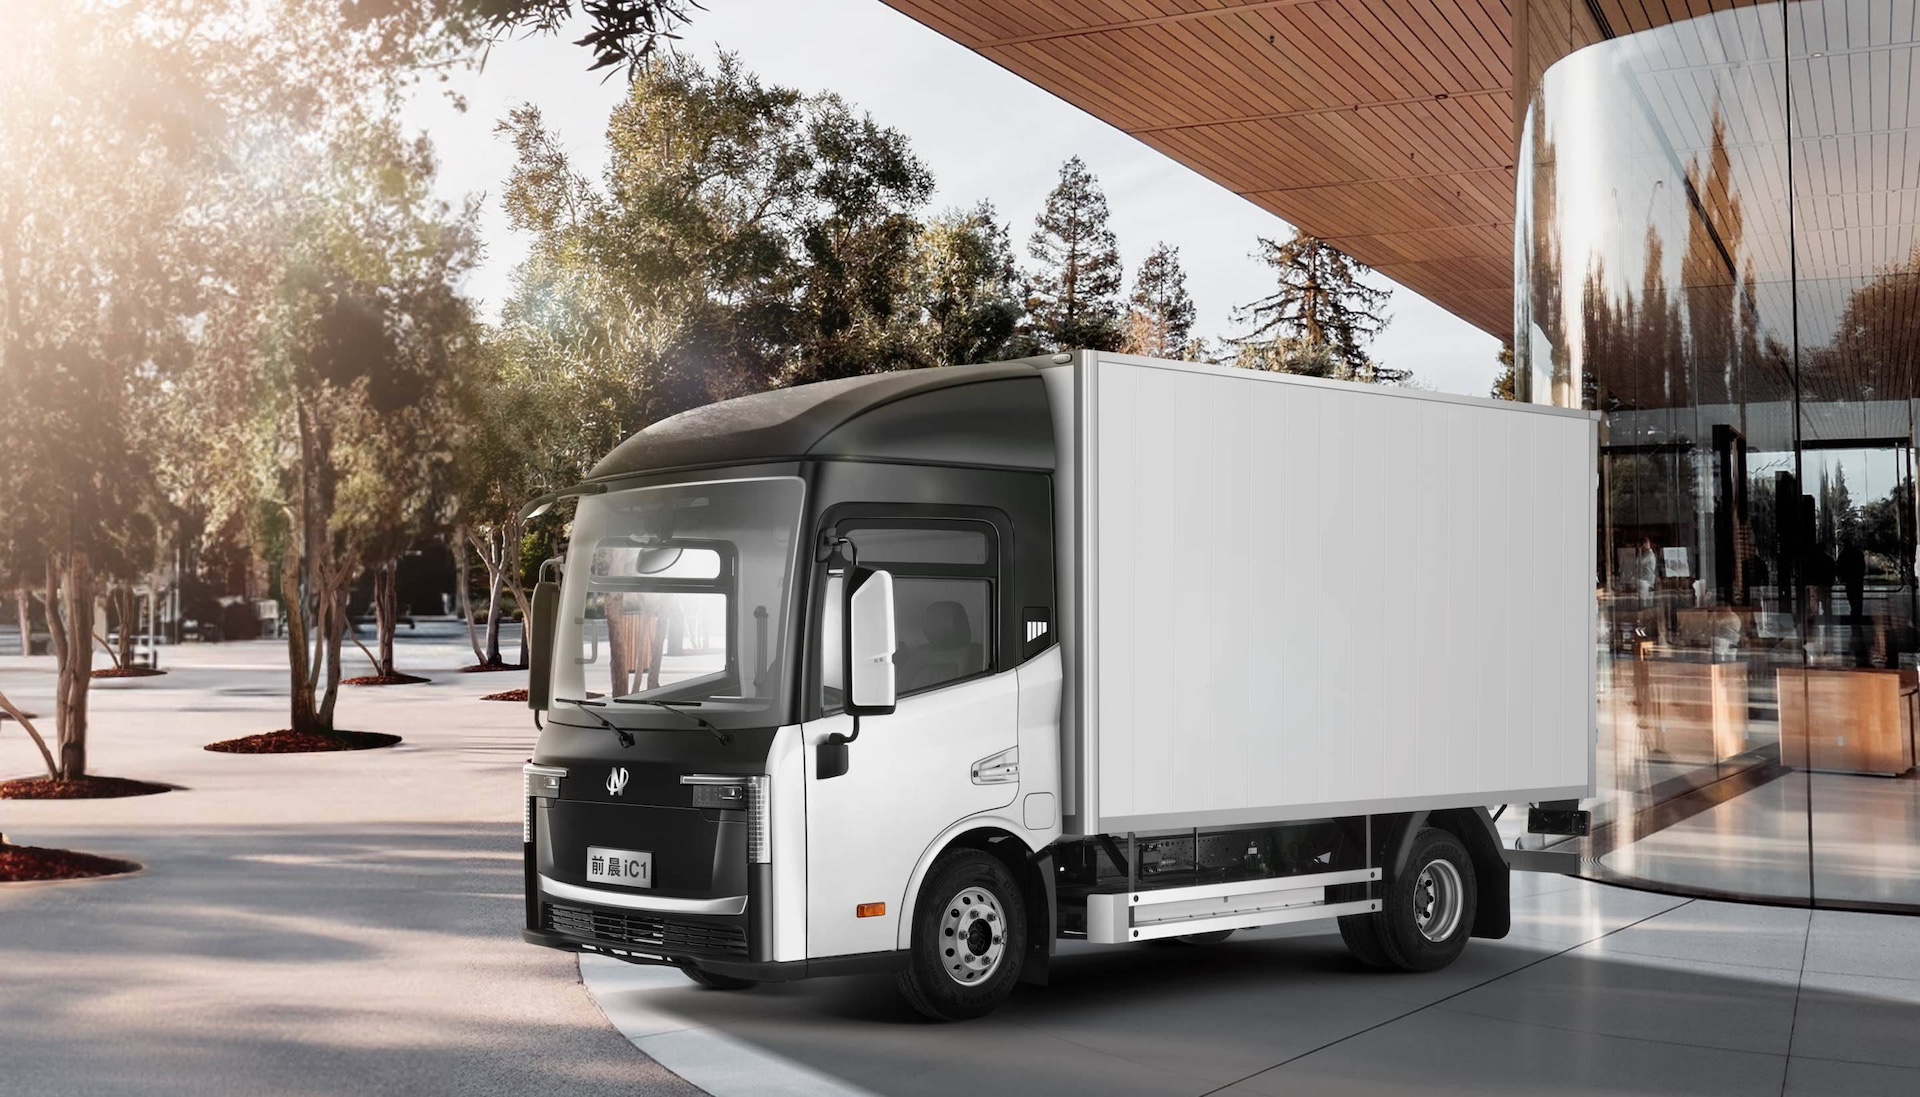 EV startup Newrizon and Al Yemni Group join forces to provide electric delivery trucks in the Gulf region.